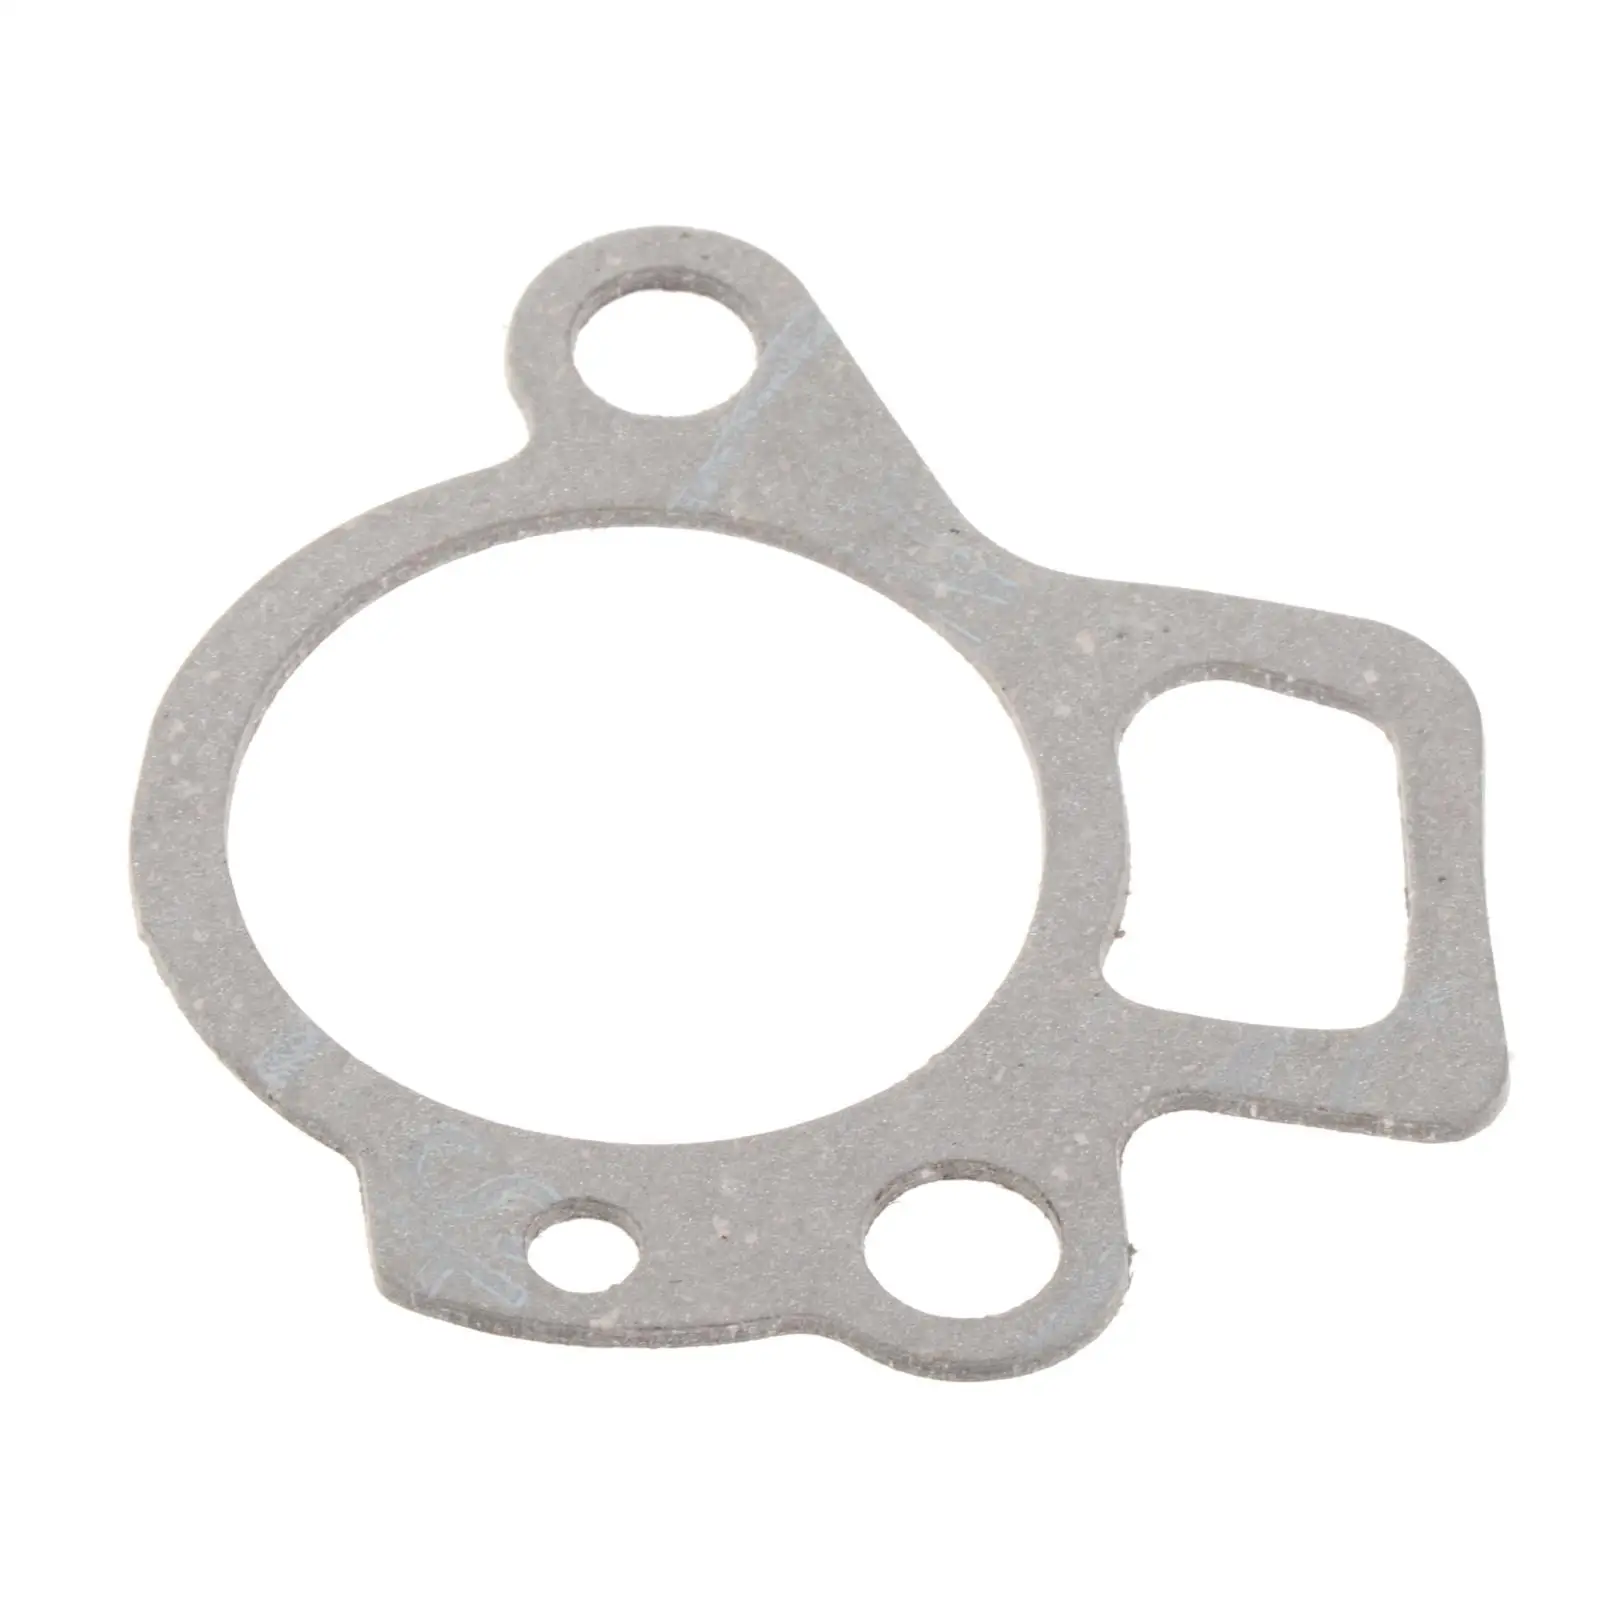 541-25 Thermostat Gasket Fit for Yamaha Outboard Engine Spare Parts High Reliability